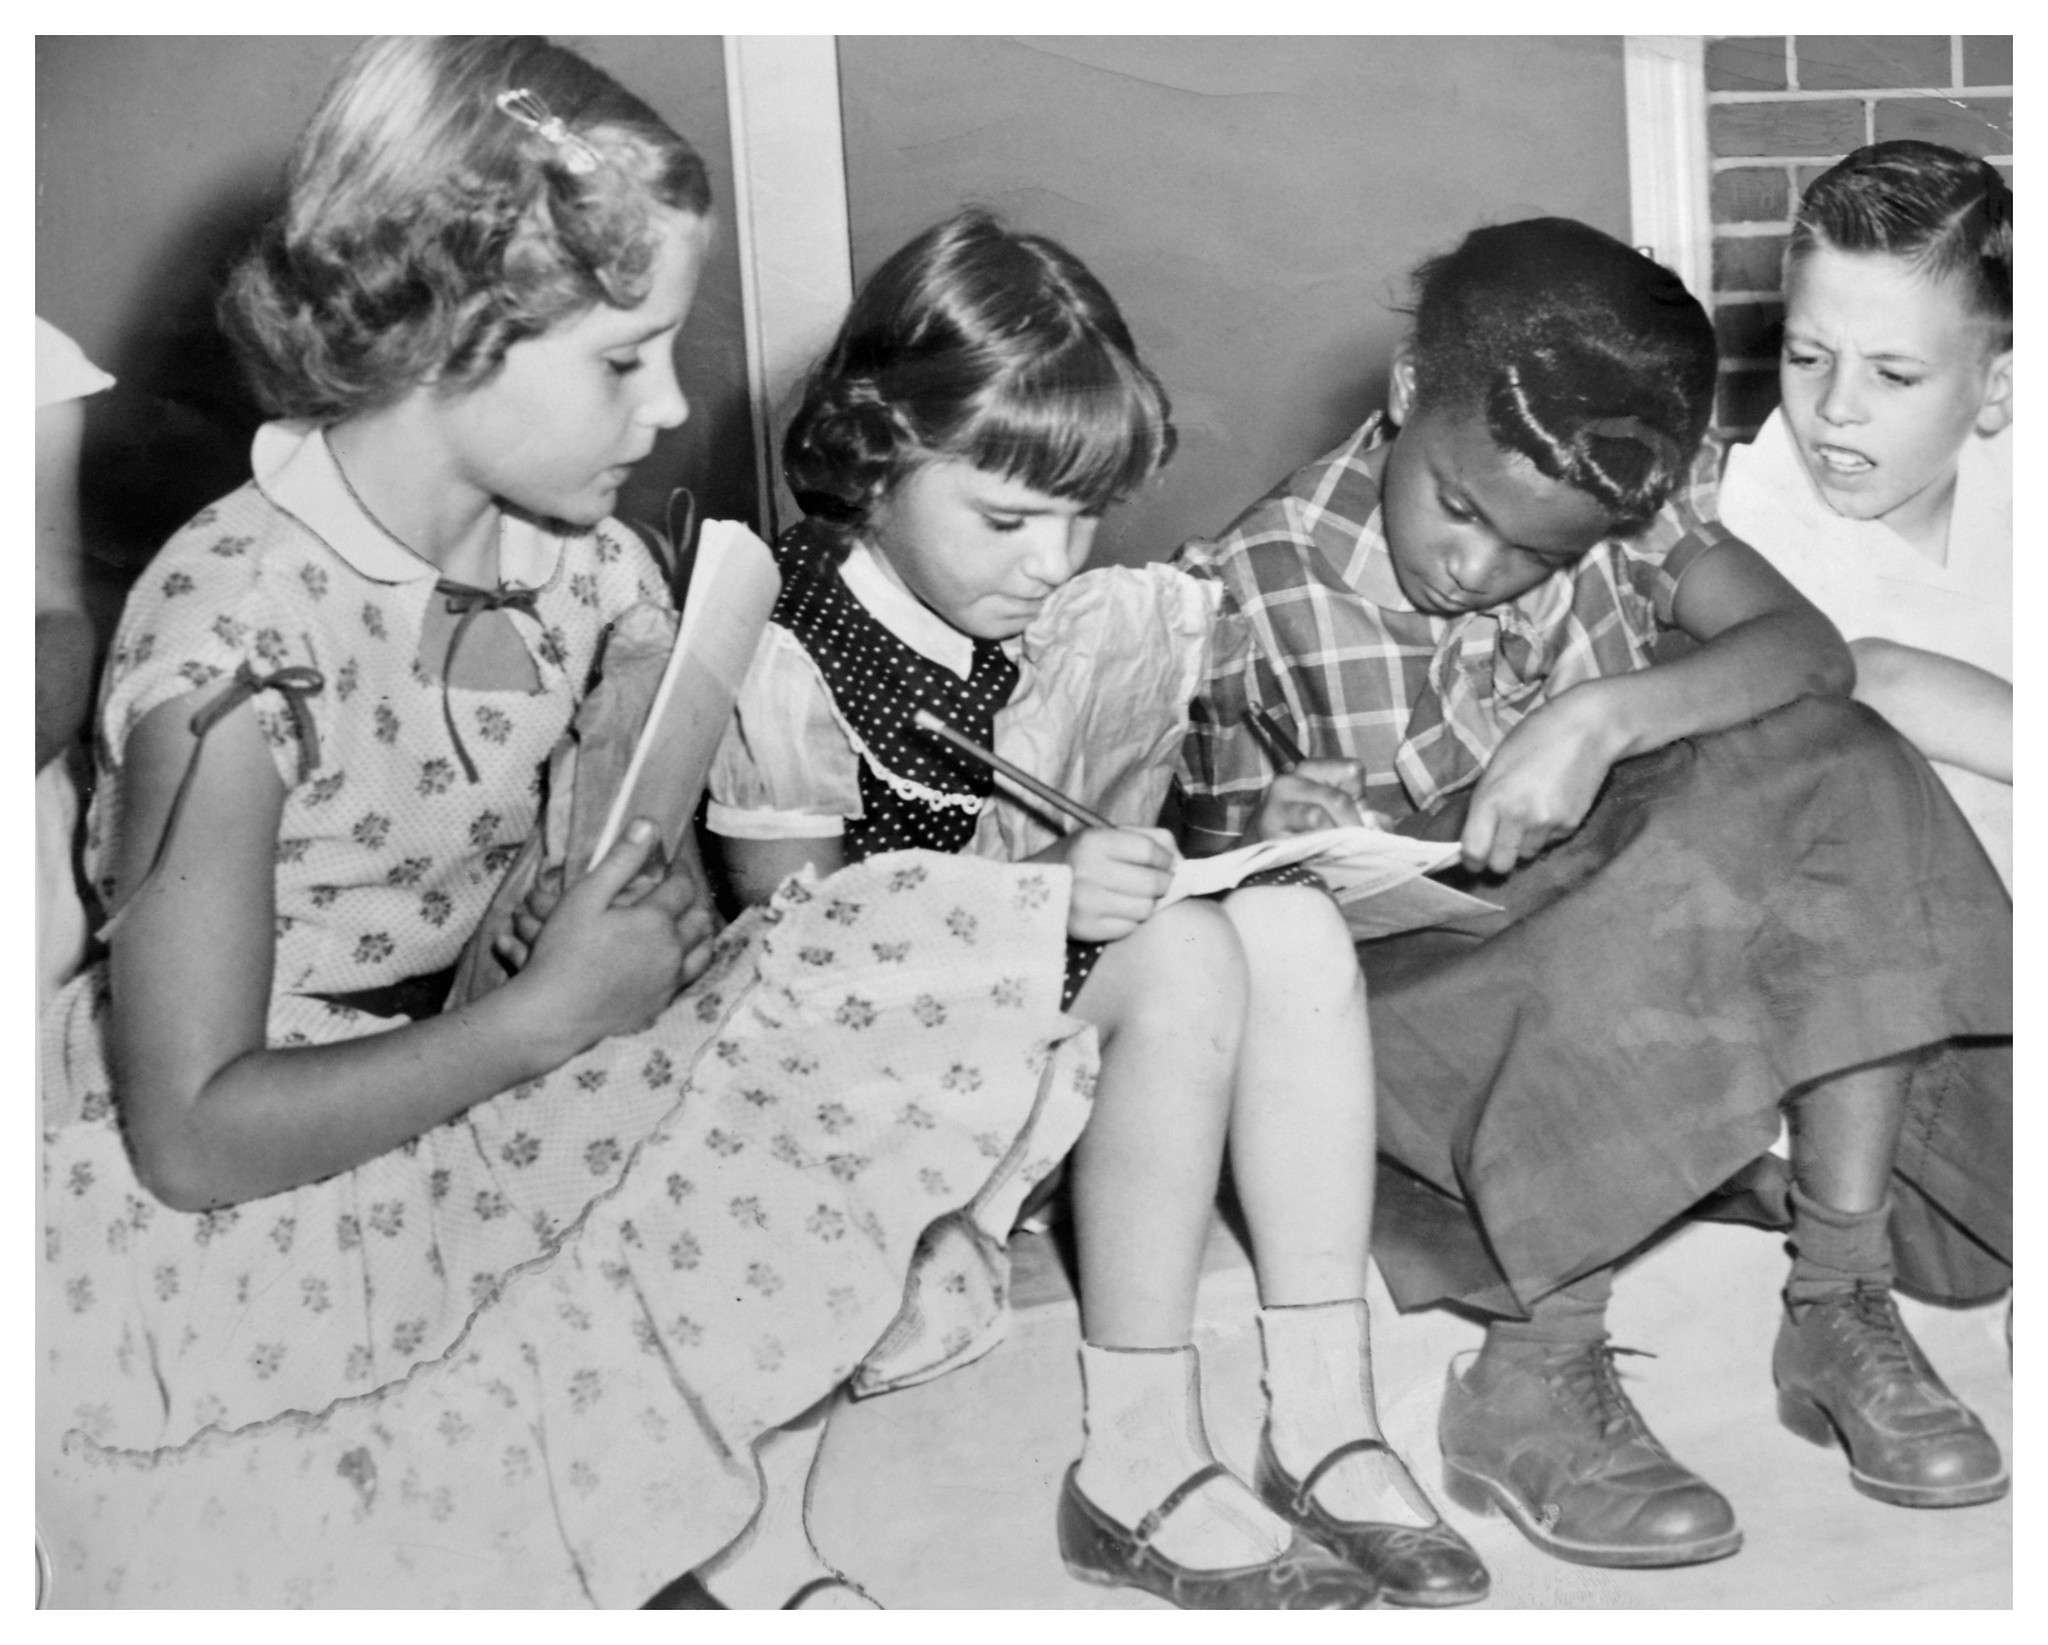 Students wait for the opening bell of the school year at the newly integrated Fort Myer elementary school, September 7, 1954. Source: DC Public Library, Star Collection © Washington Post.